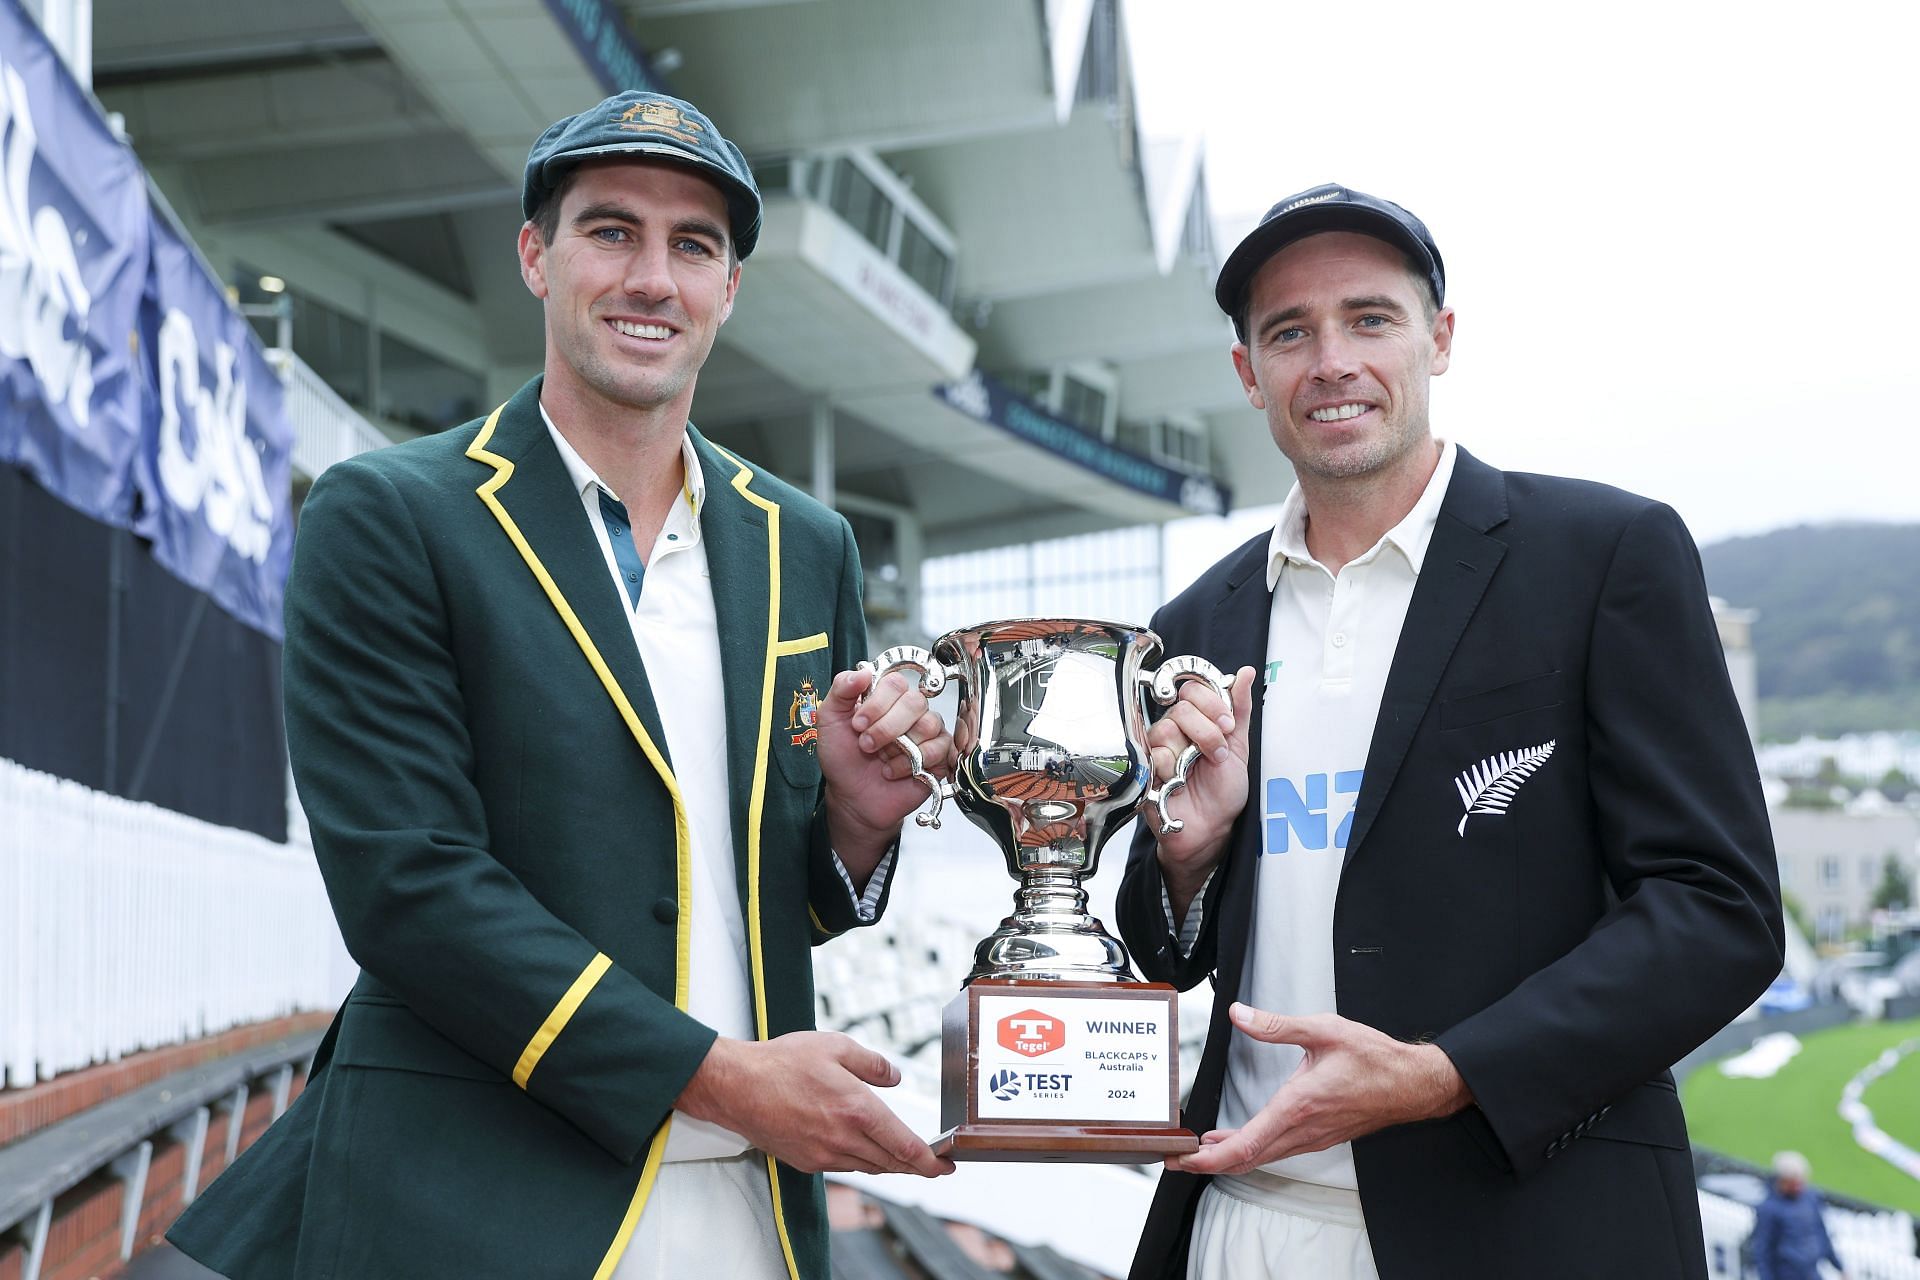 Pat Cummins and Tim Southee are going head-to-head as captains (Image: Getty)